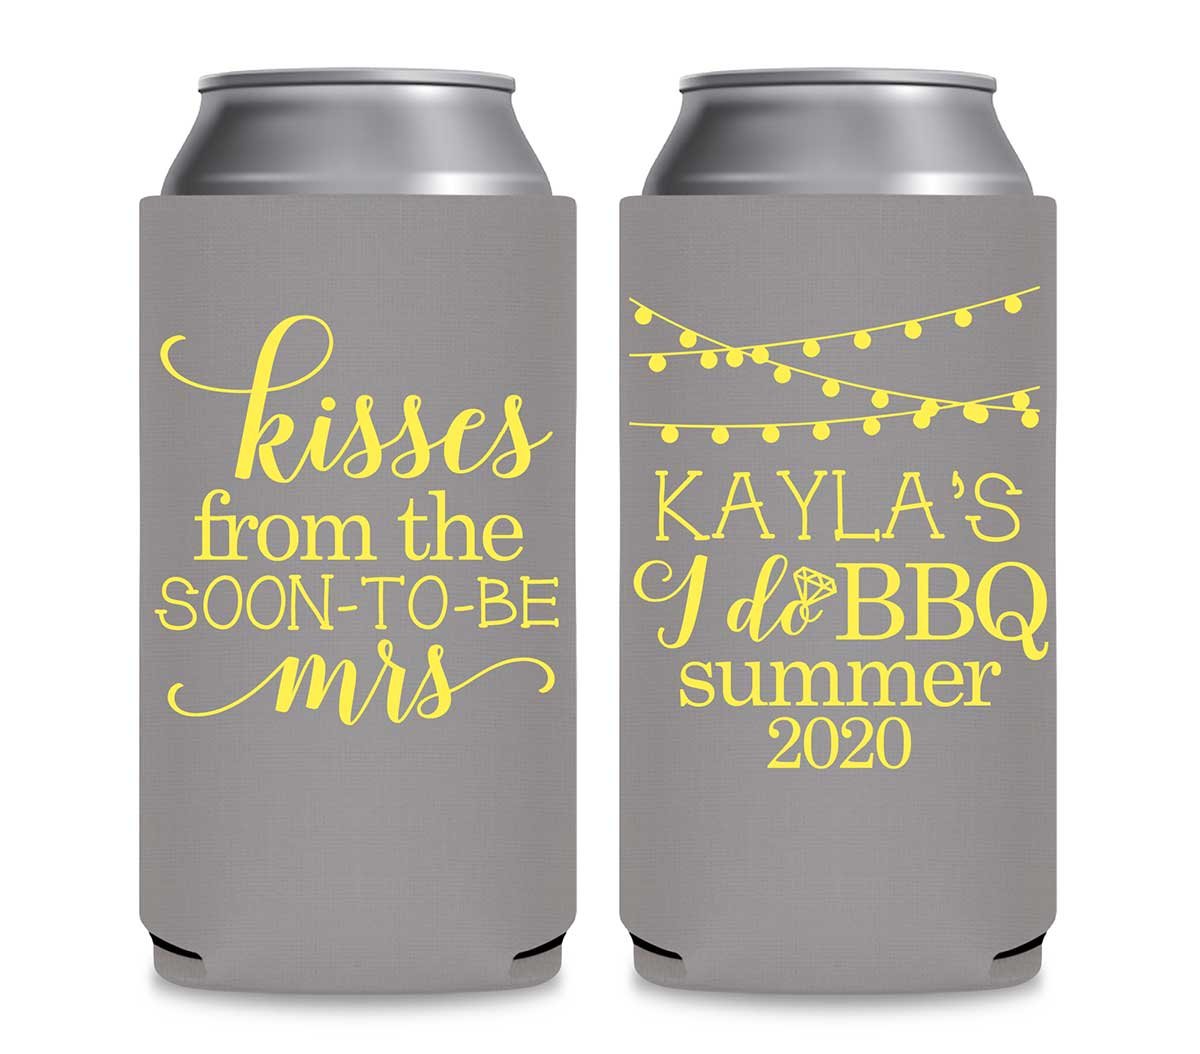 Kisses From The Soon-To-Be Mrs Foldable 12 oz Slim Can Koozies Wedding Gifts for Guests